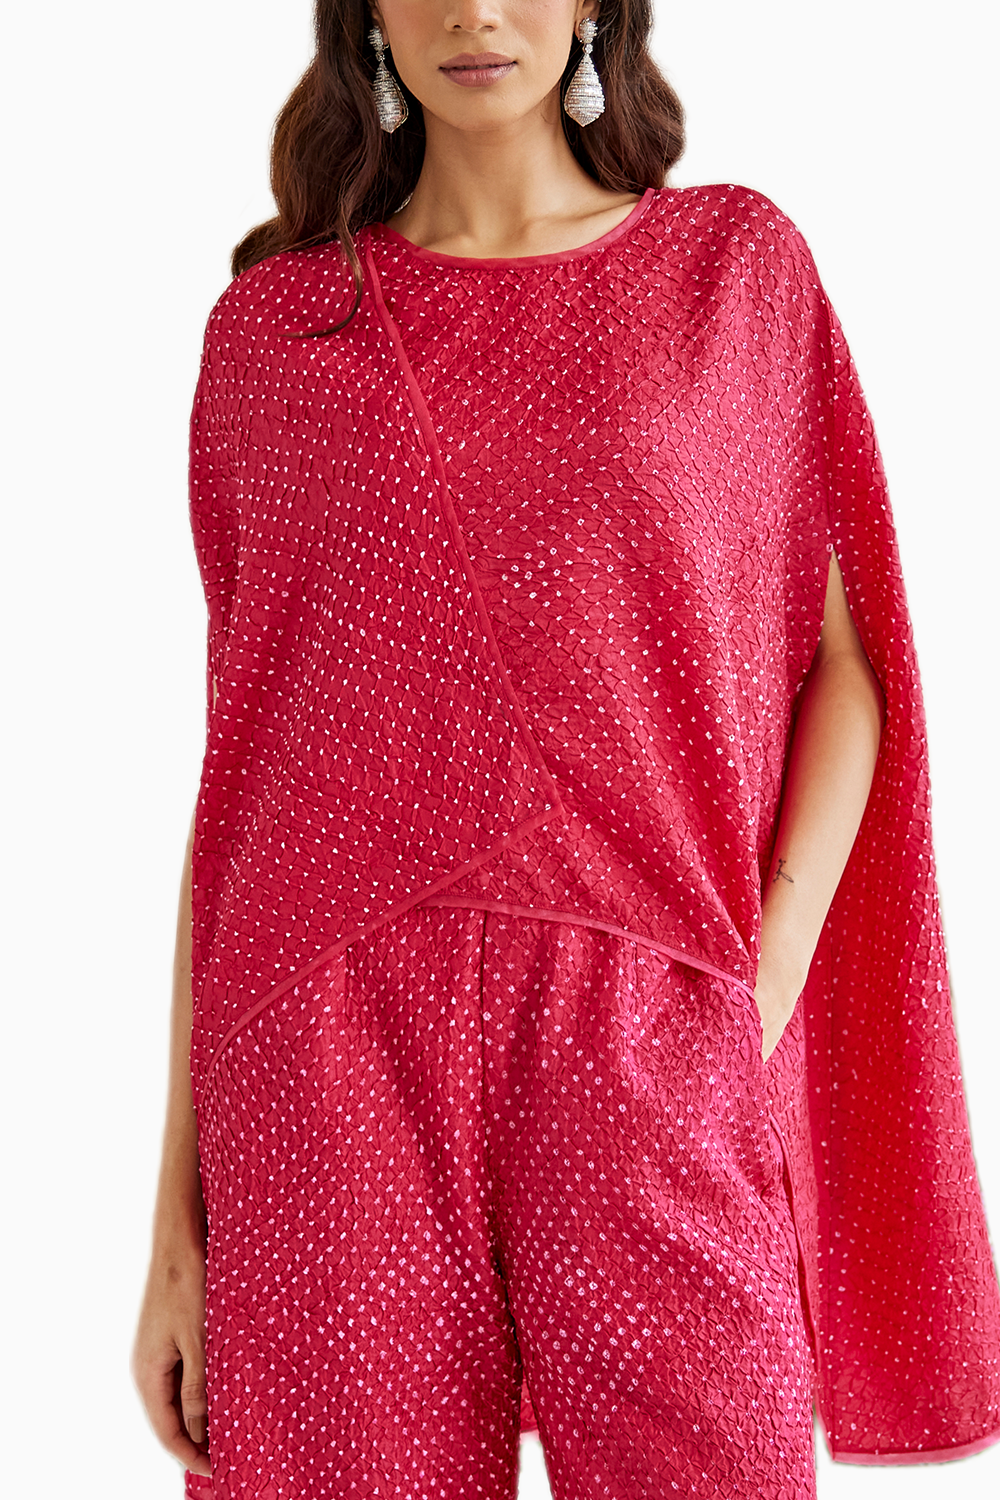 Pink Bandhani Wrap Over top with Slit Plazzos